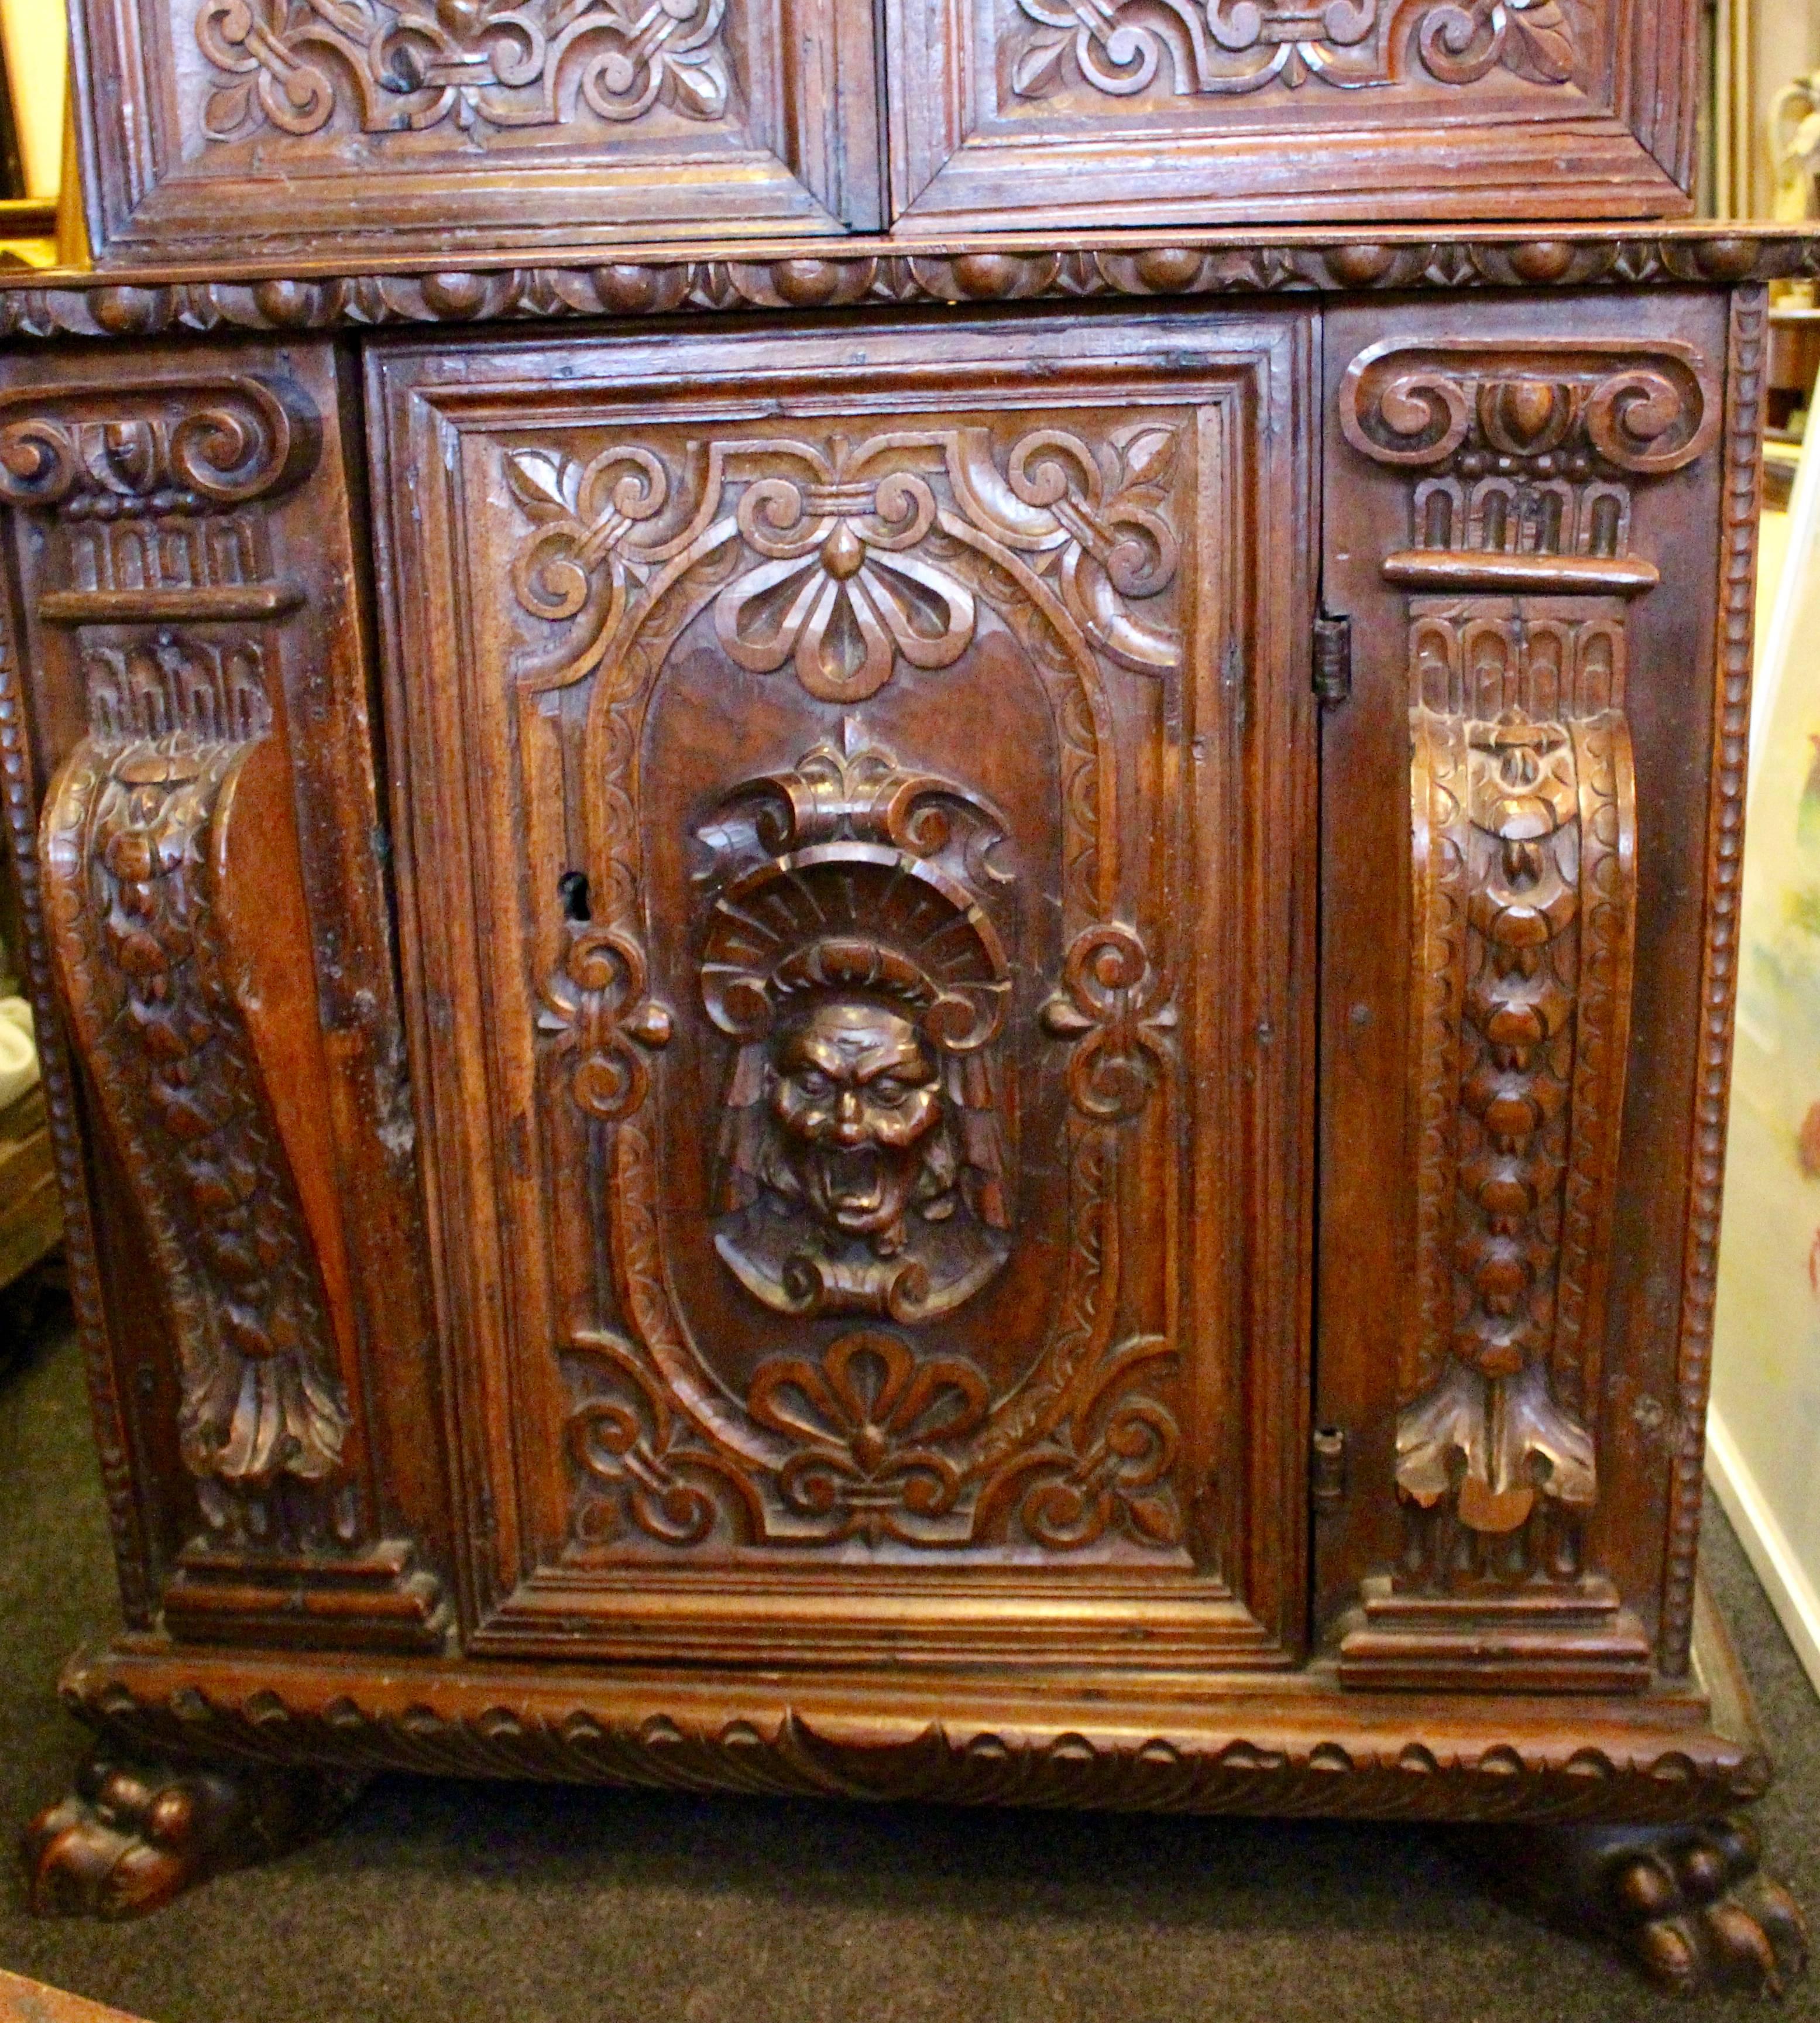 A stunning example of an early 17th century Italian cabinet. Heavily carved with egg and dart style pediment above upper cabinet with two beautifully carved doors, adorned with one happy and one sad face. Enclosing two shelves.
The lower cabinet